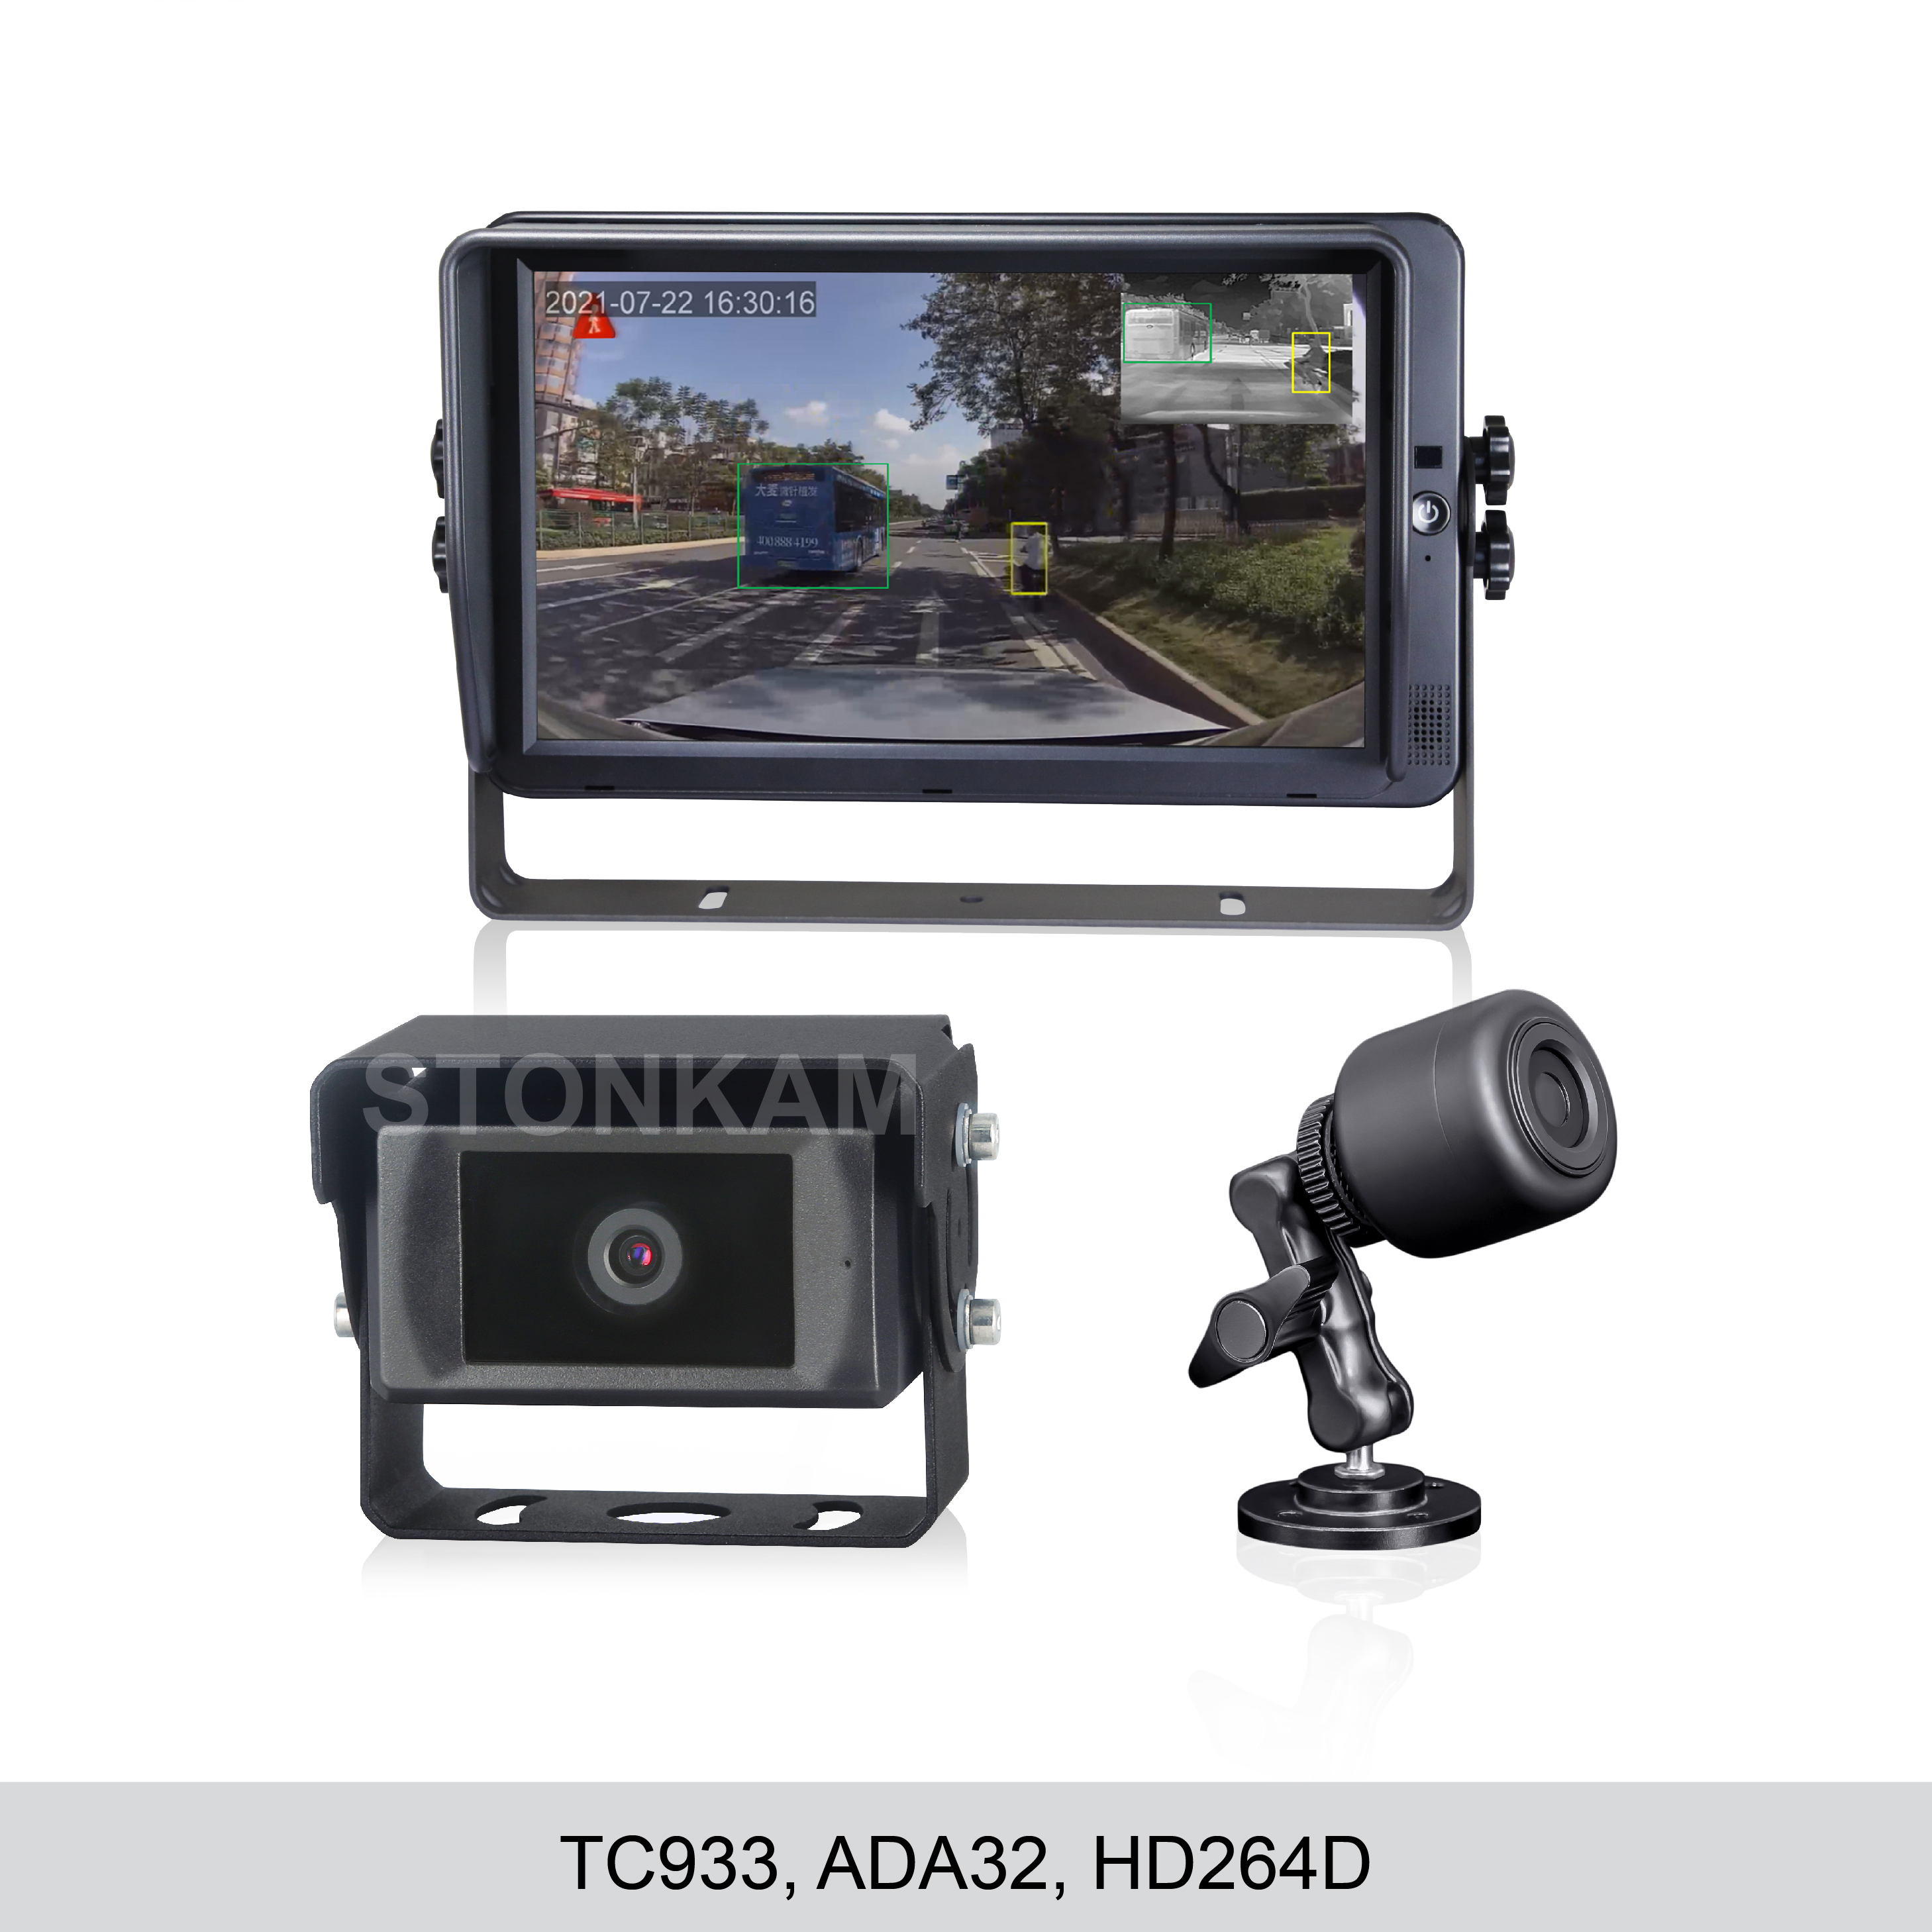 AI Dual Vision Infrared Thermal Imaging Pedestrian & Vehicle Detection System